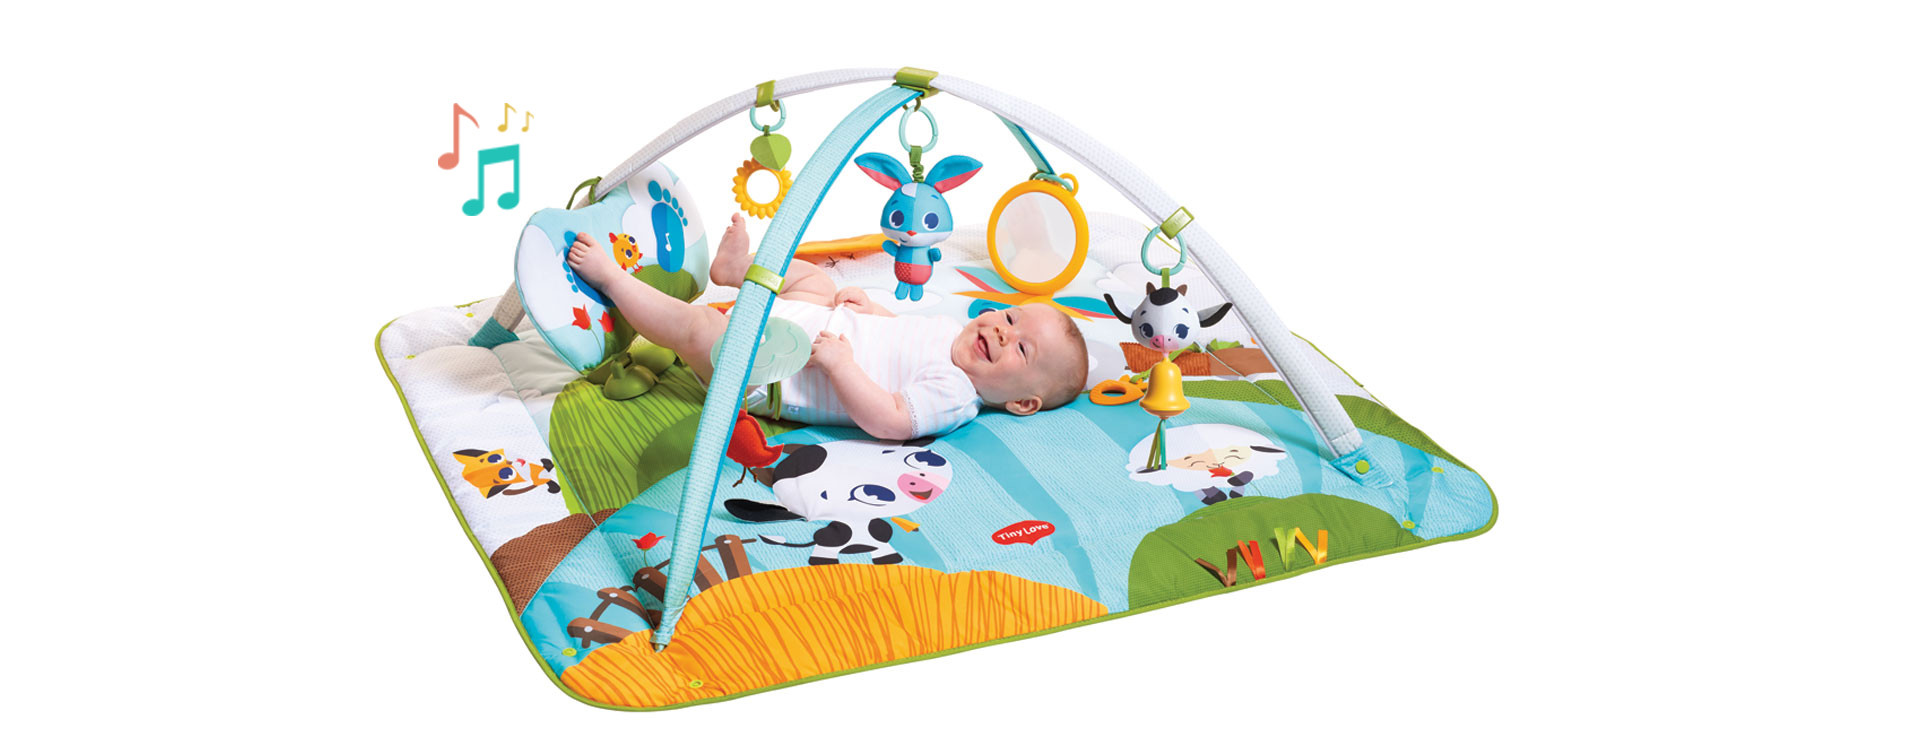 XL mat with fun dual-position baby activated response pad